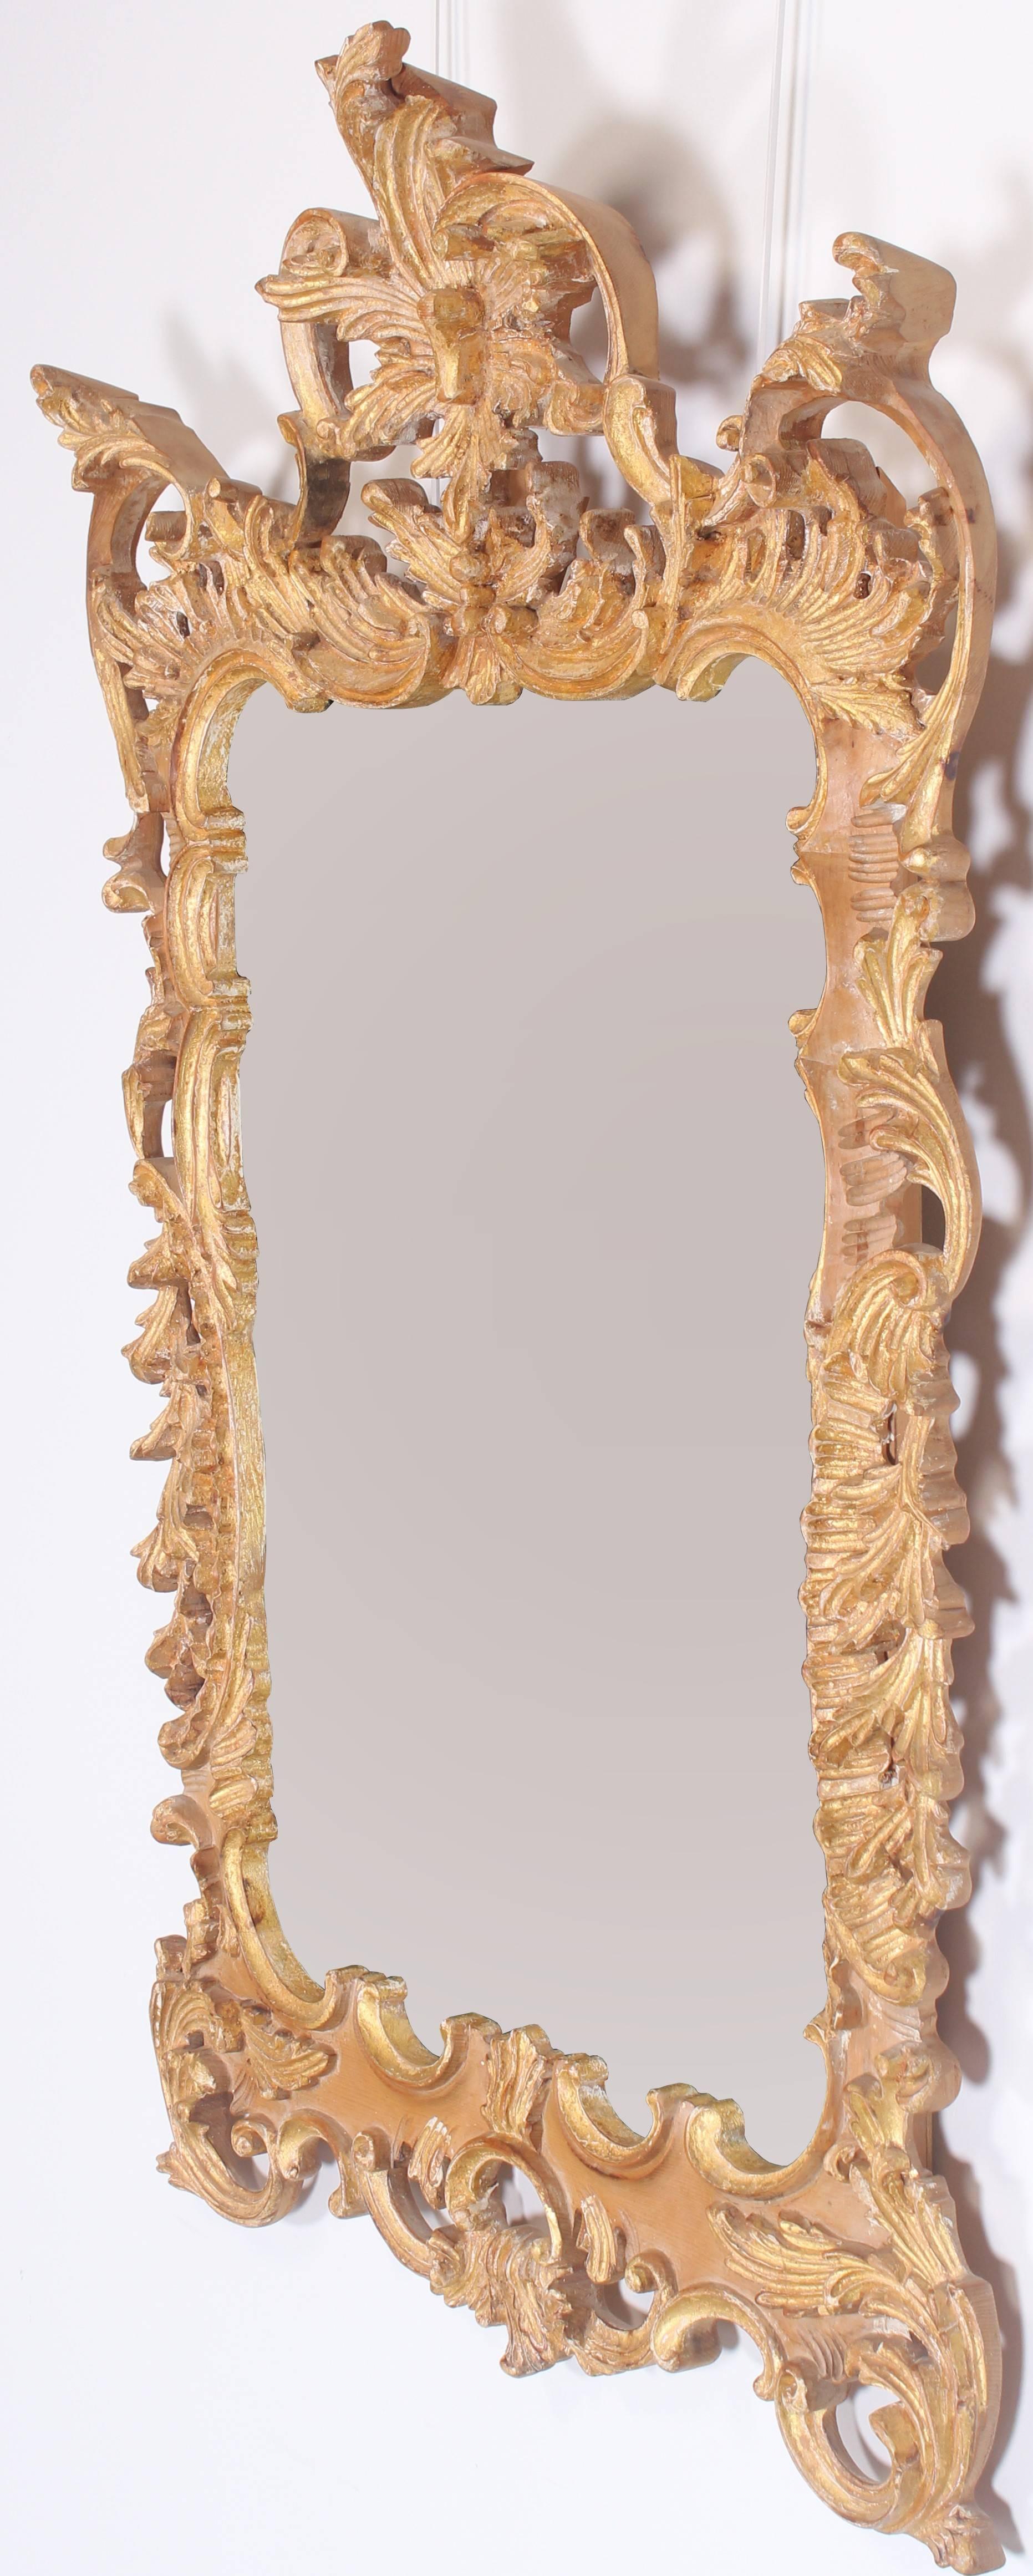 A hand-carved frame made in Italy by Labarge. The highly carved frame has a nicely executed antique finish showing some natural wood, gesso, and gold gilt finish. There is one tight line in the wood on the left side of the cartouche, inherent to